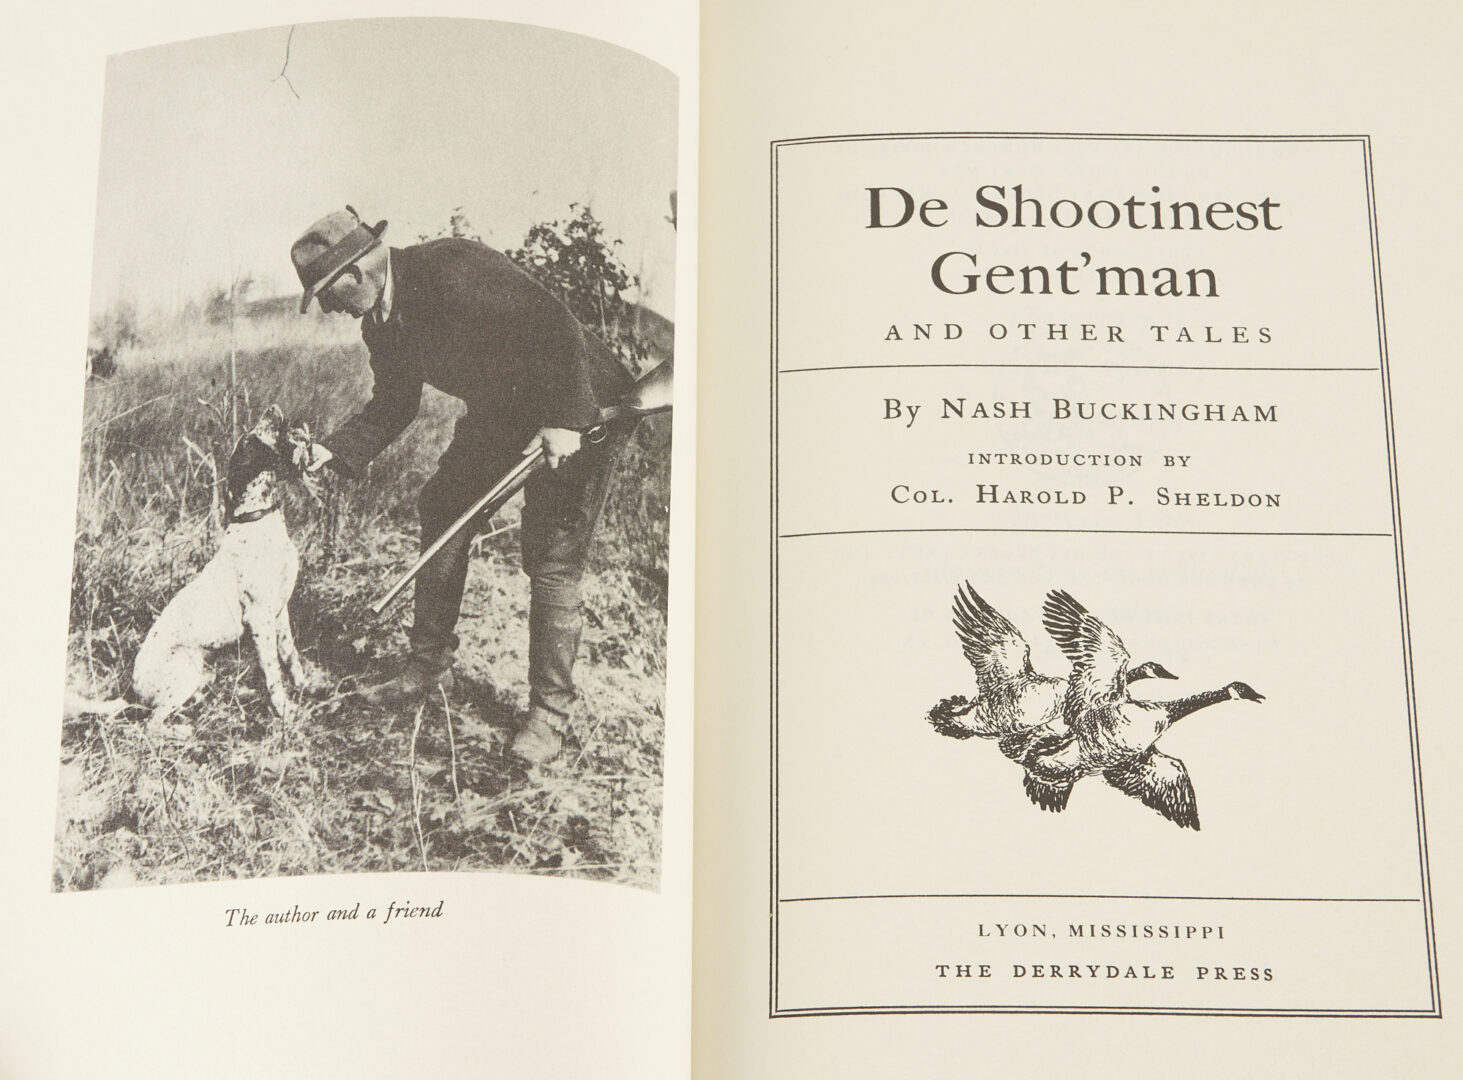 Lot 630: 10 Limited Edition Sporting & Game Books, pub. Derrydale Press